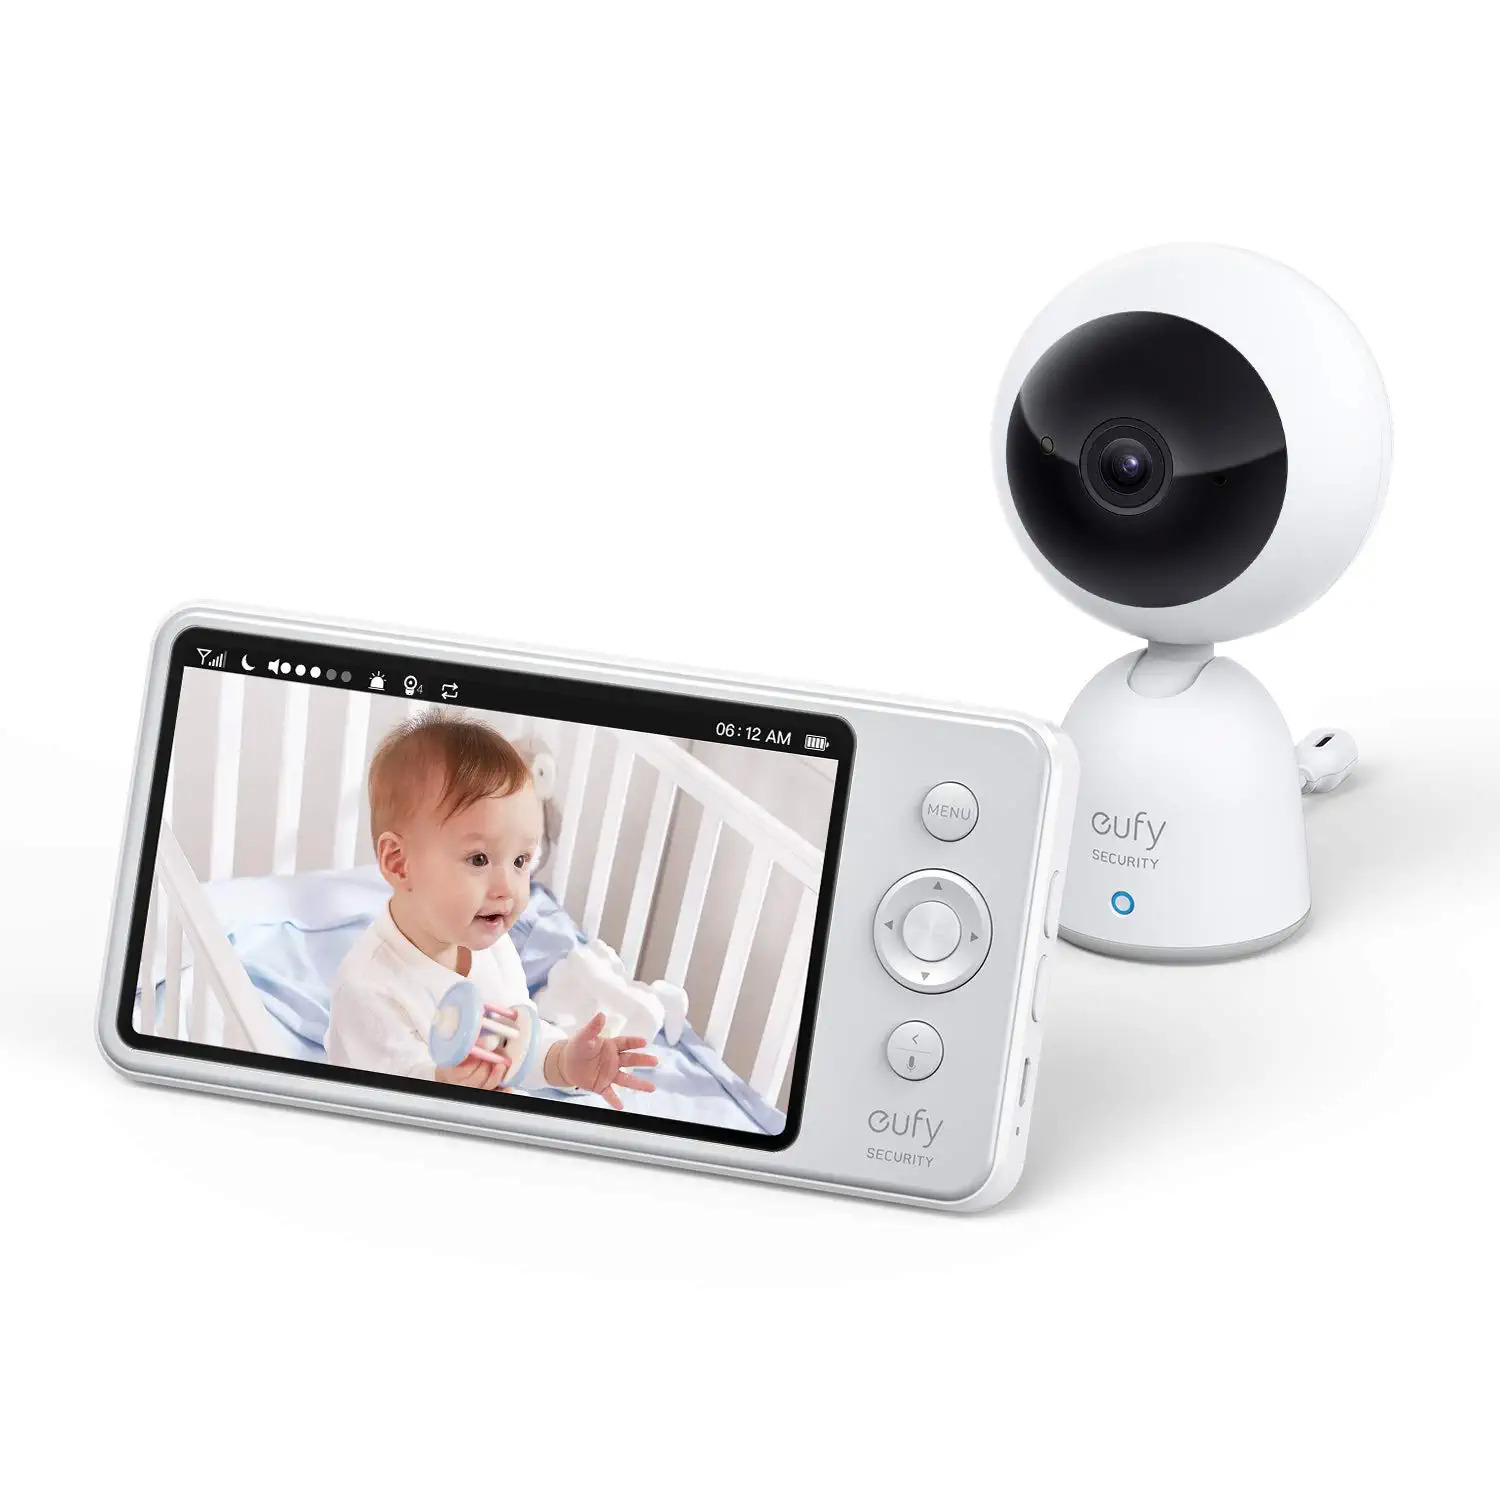 Eufy Security Video 720p Baby Monitor w/ Camera & Audio for $89.99 + Free Shipping